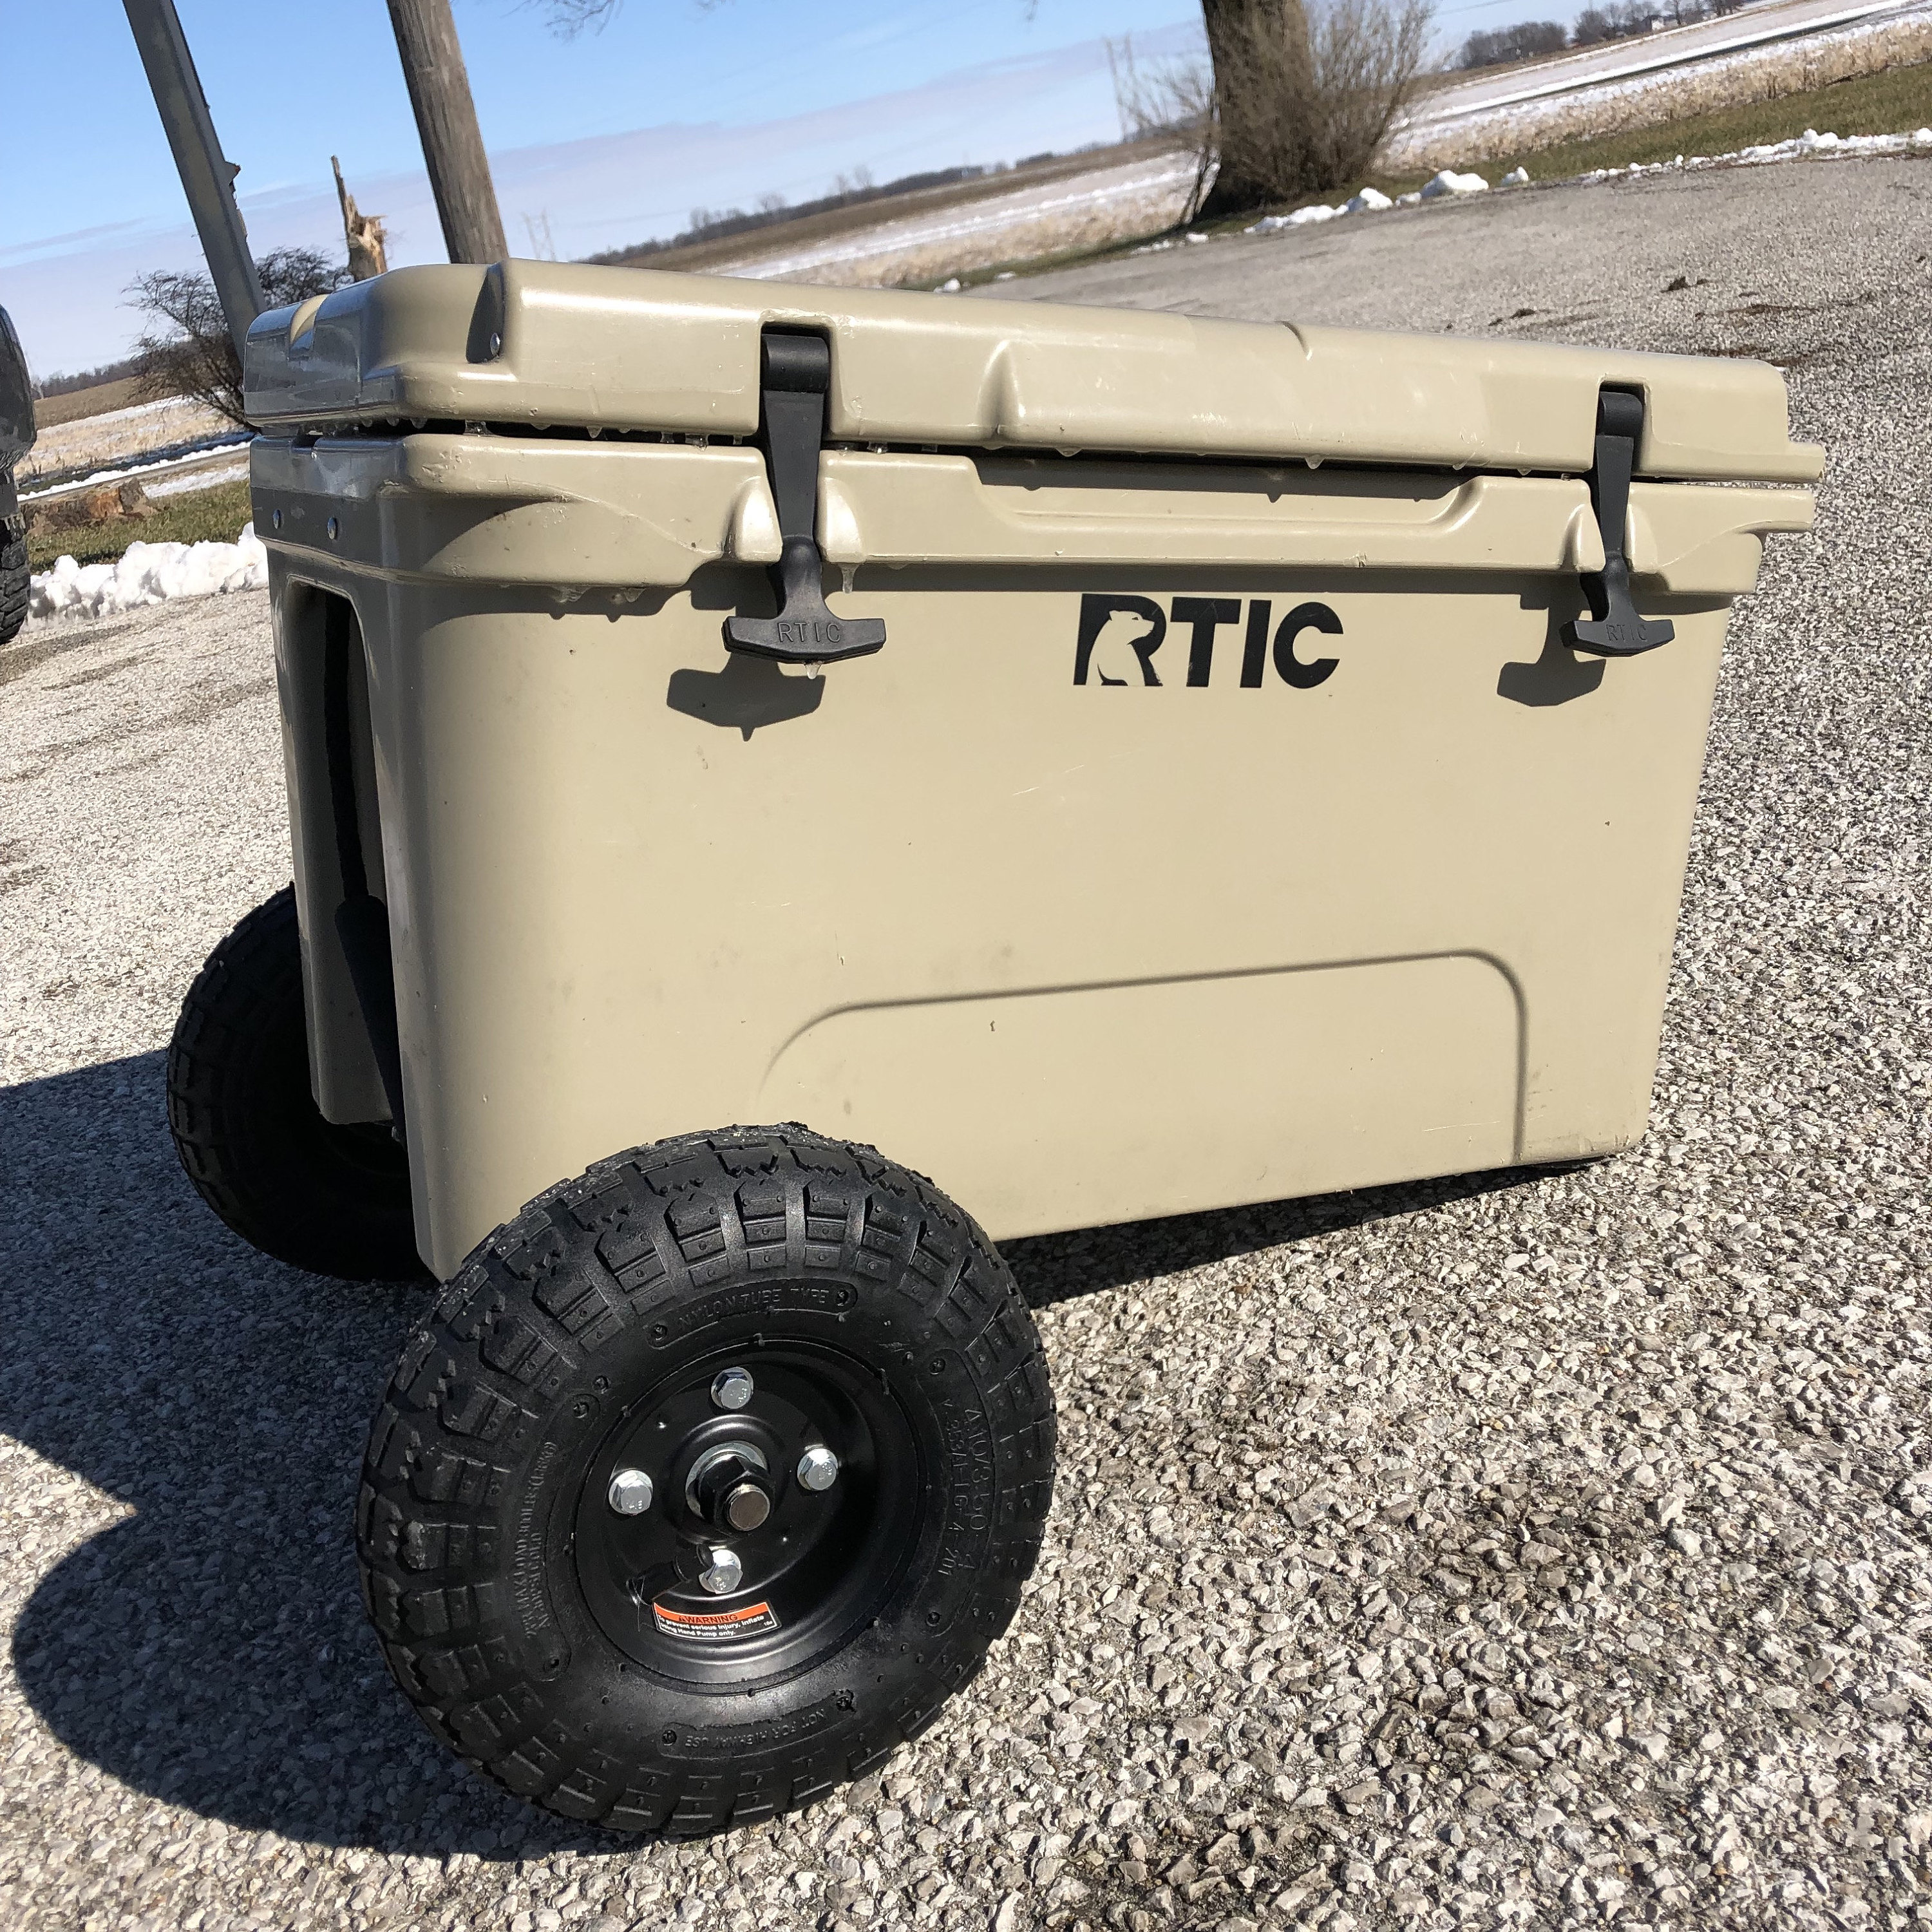 The Yedi Sledi - Custom Wheels for Yeti, RTIC, and Other Rotomolded Coolers